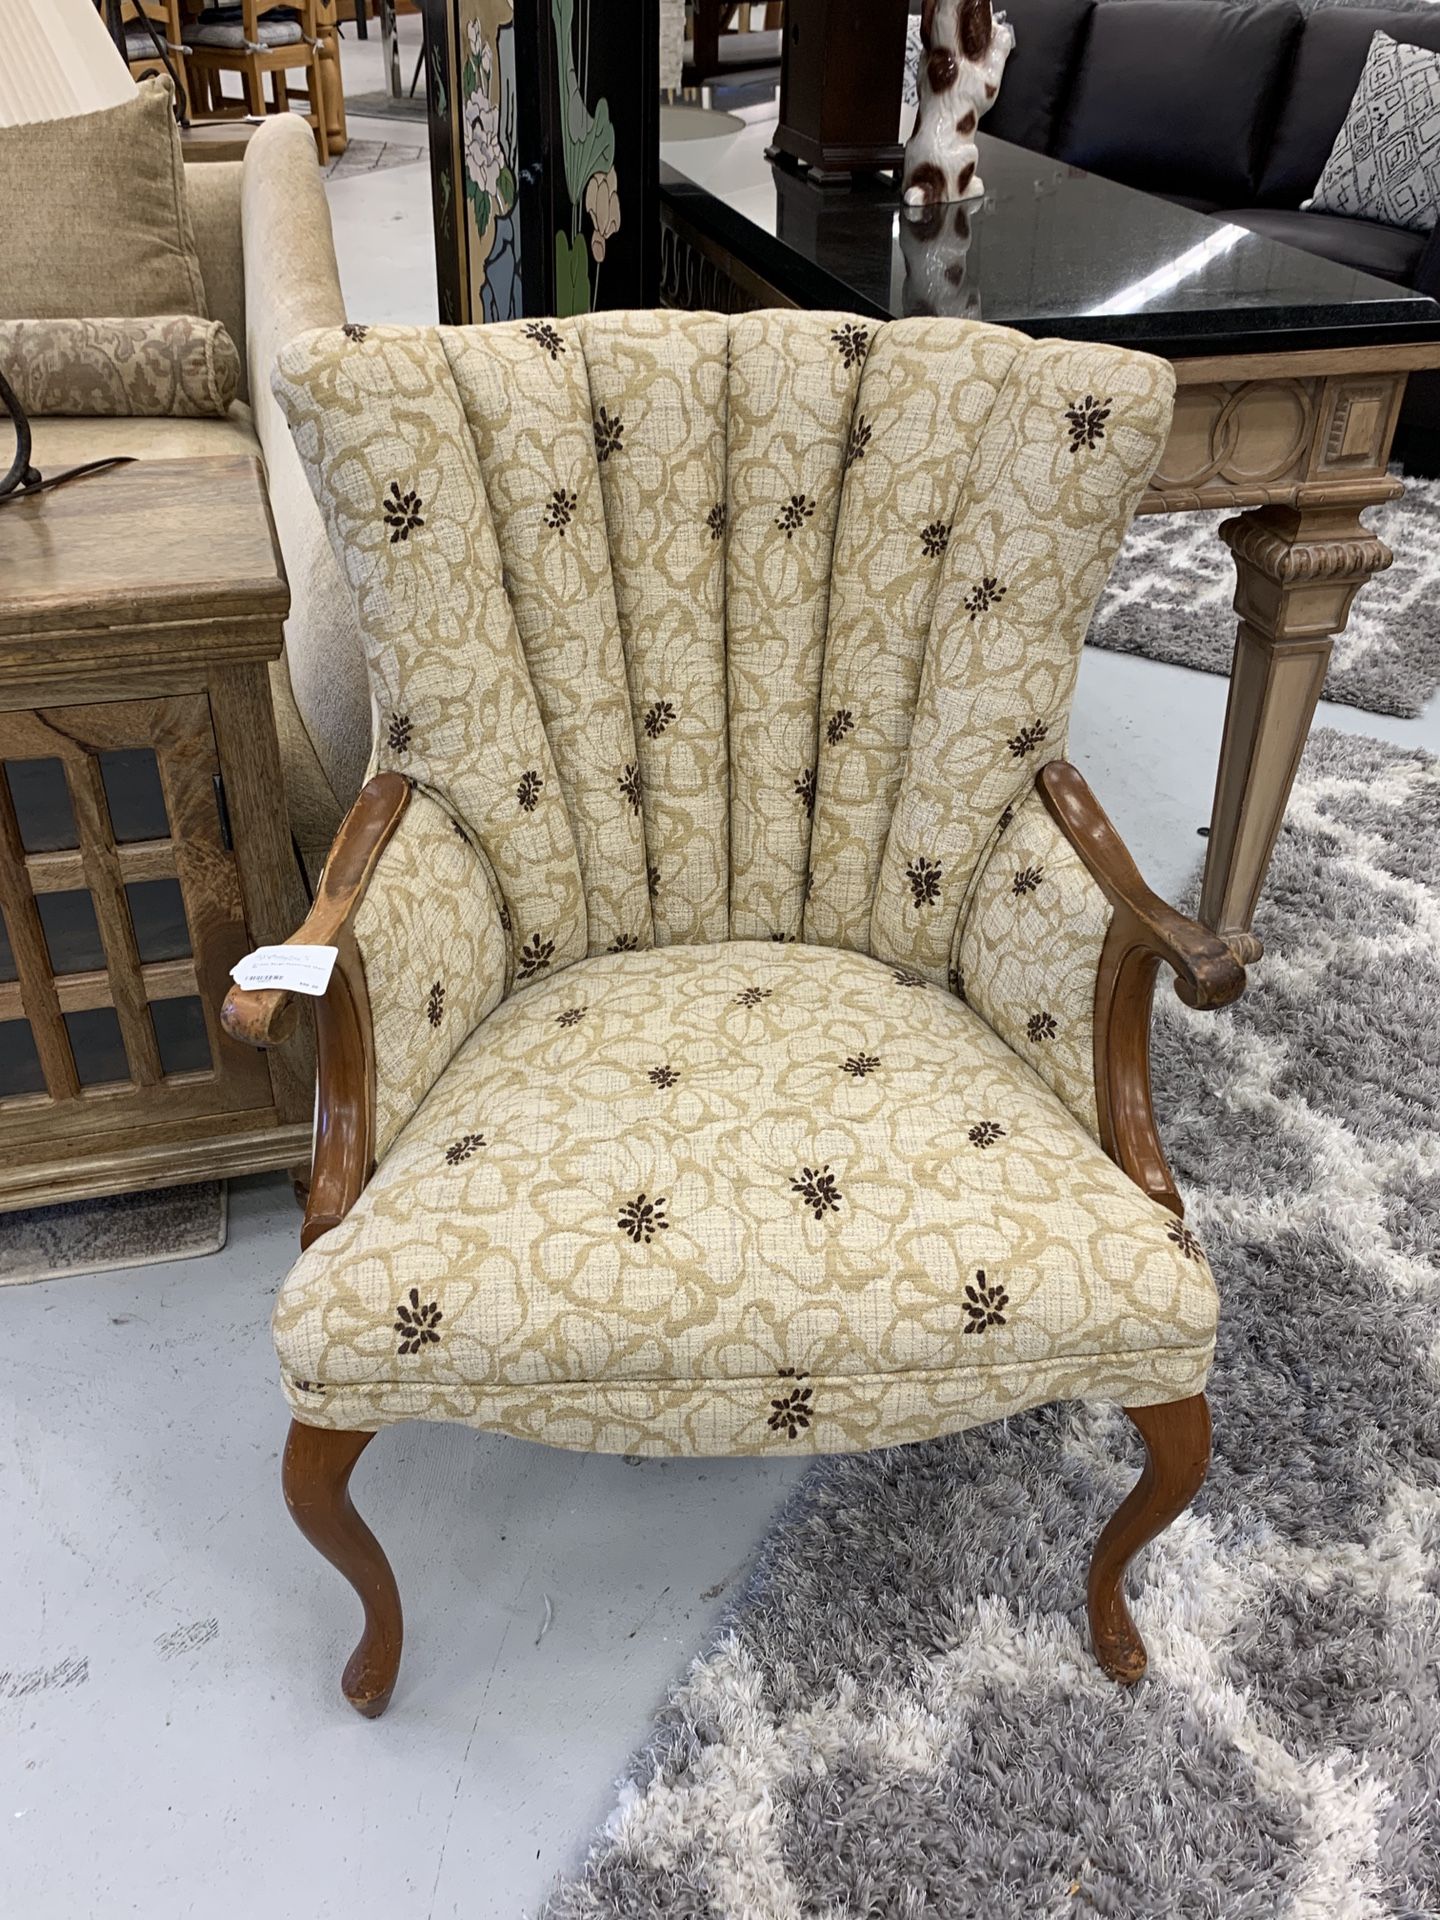 Ornate Beige Patterned Chair